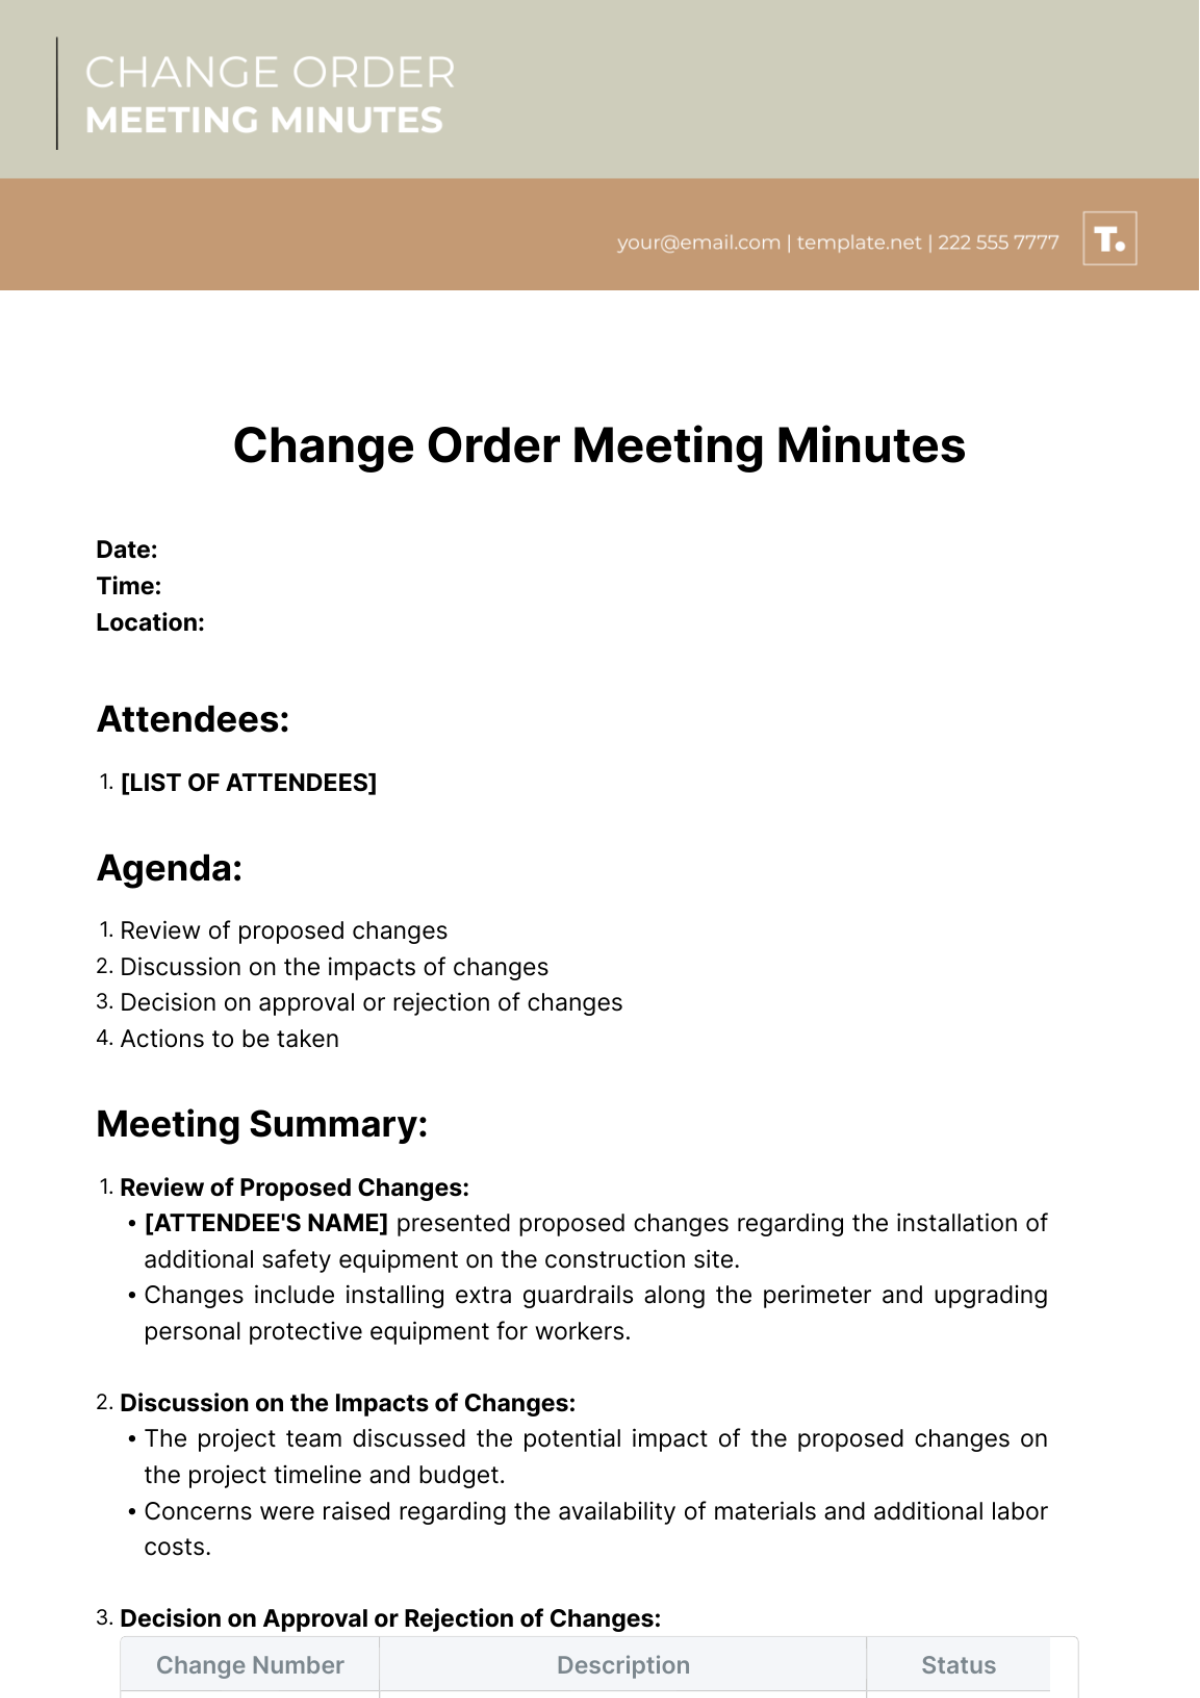 Change Order Meeting Minutes Template